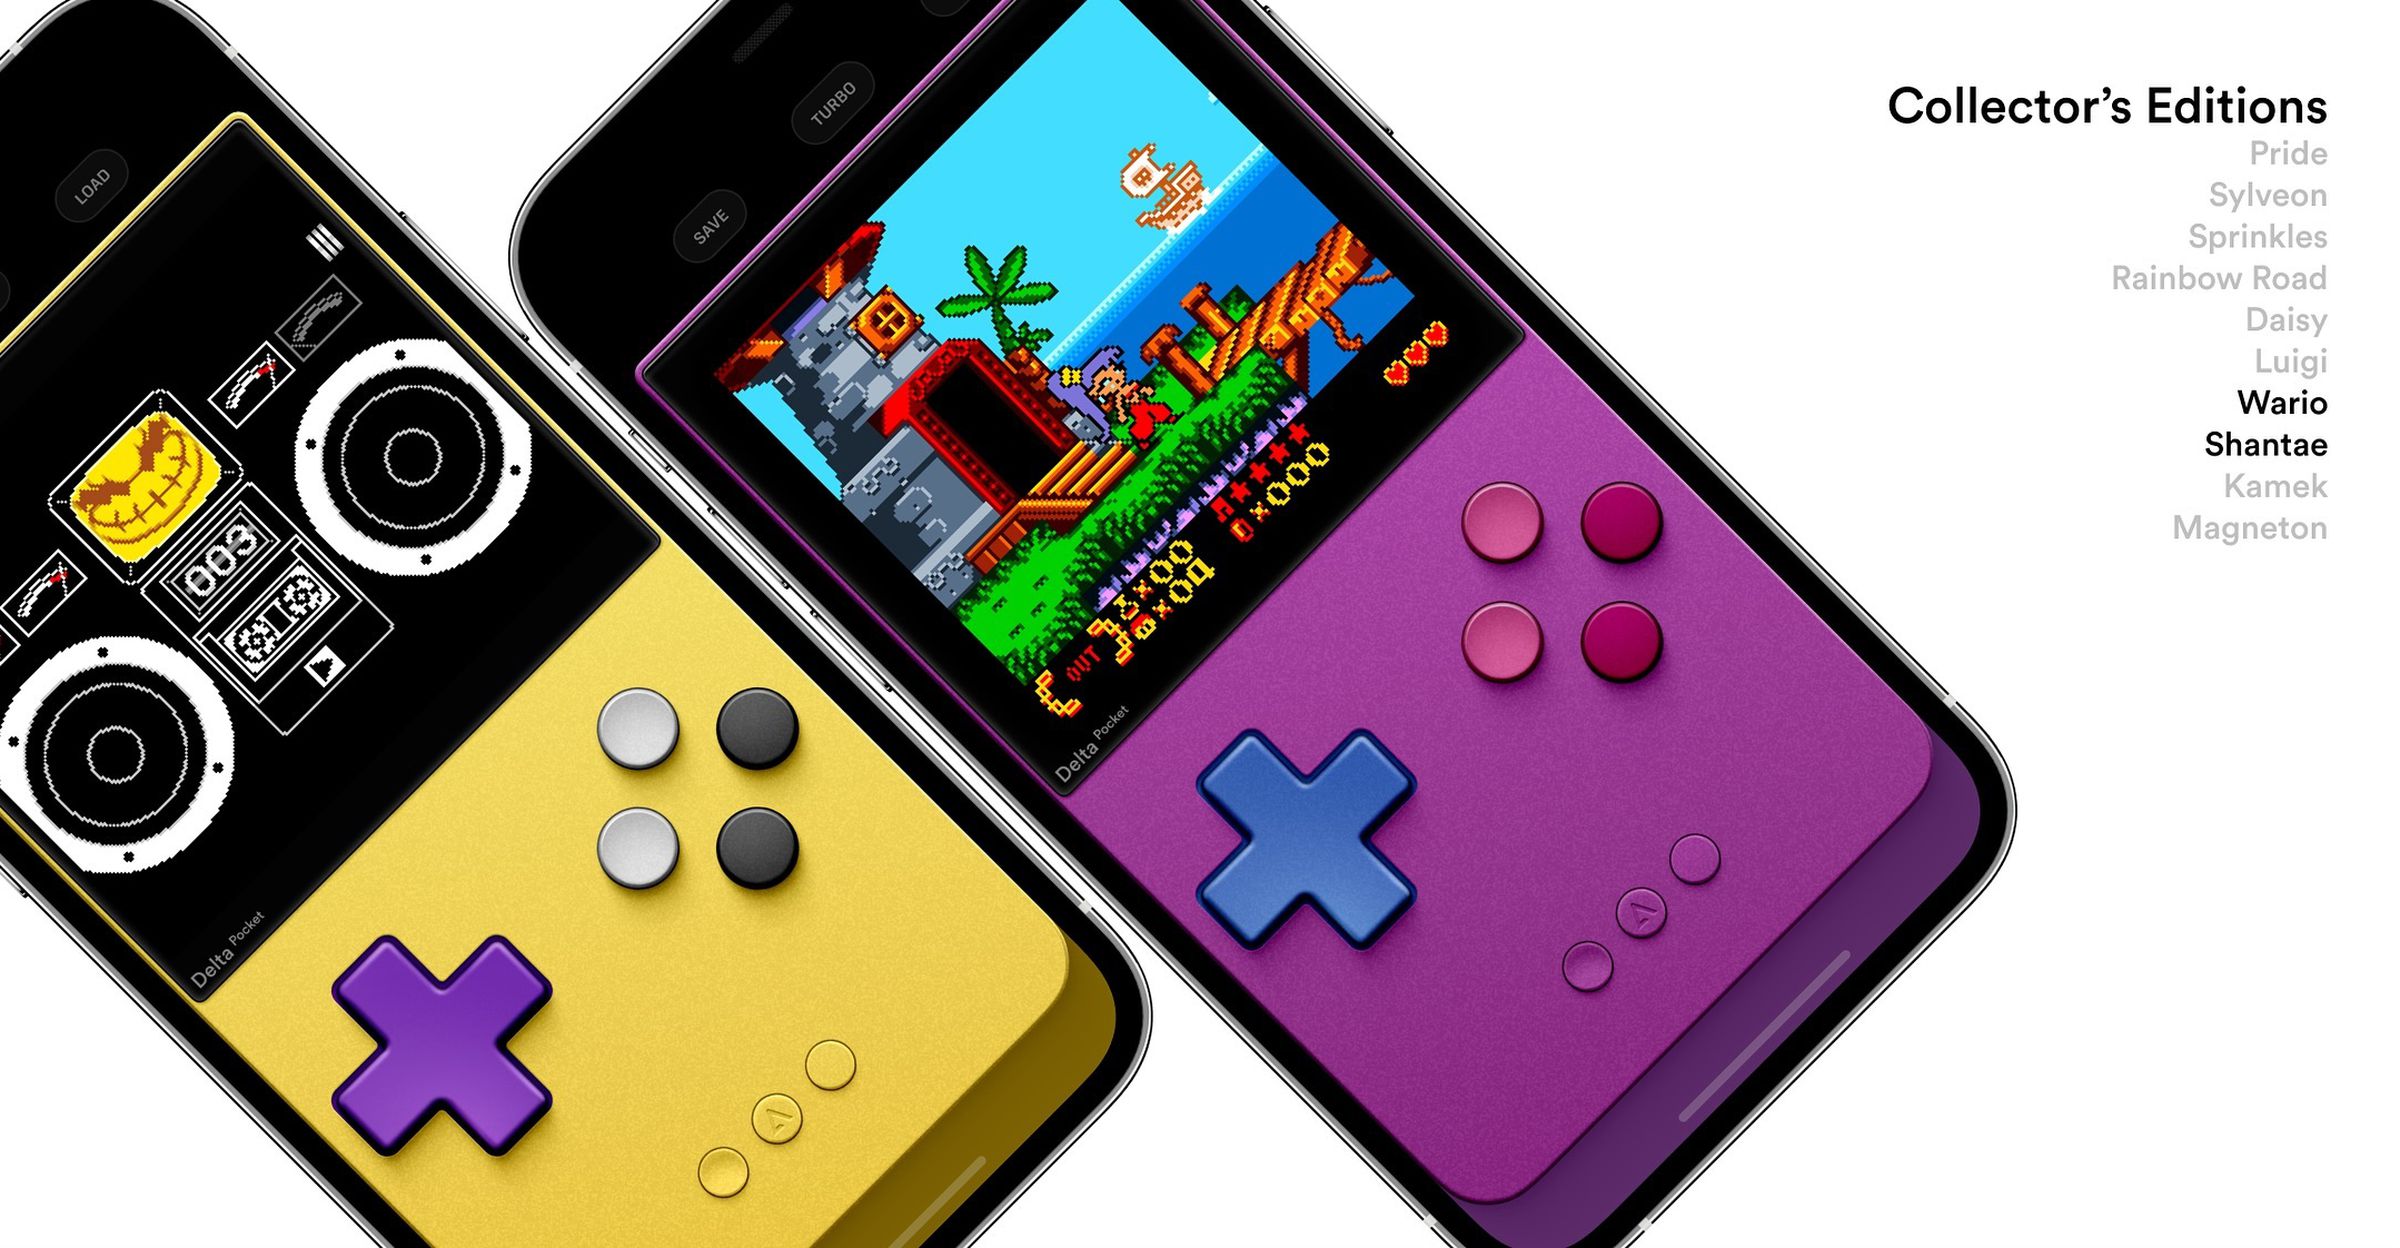 Two skins, one yellow with a purple D-pad and black and white buttons, one purple with a blue d-pad and pink / dark pink buttons.